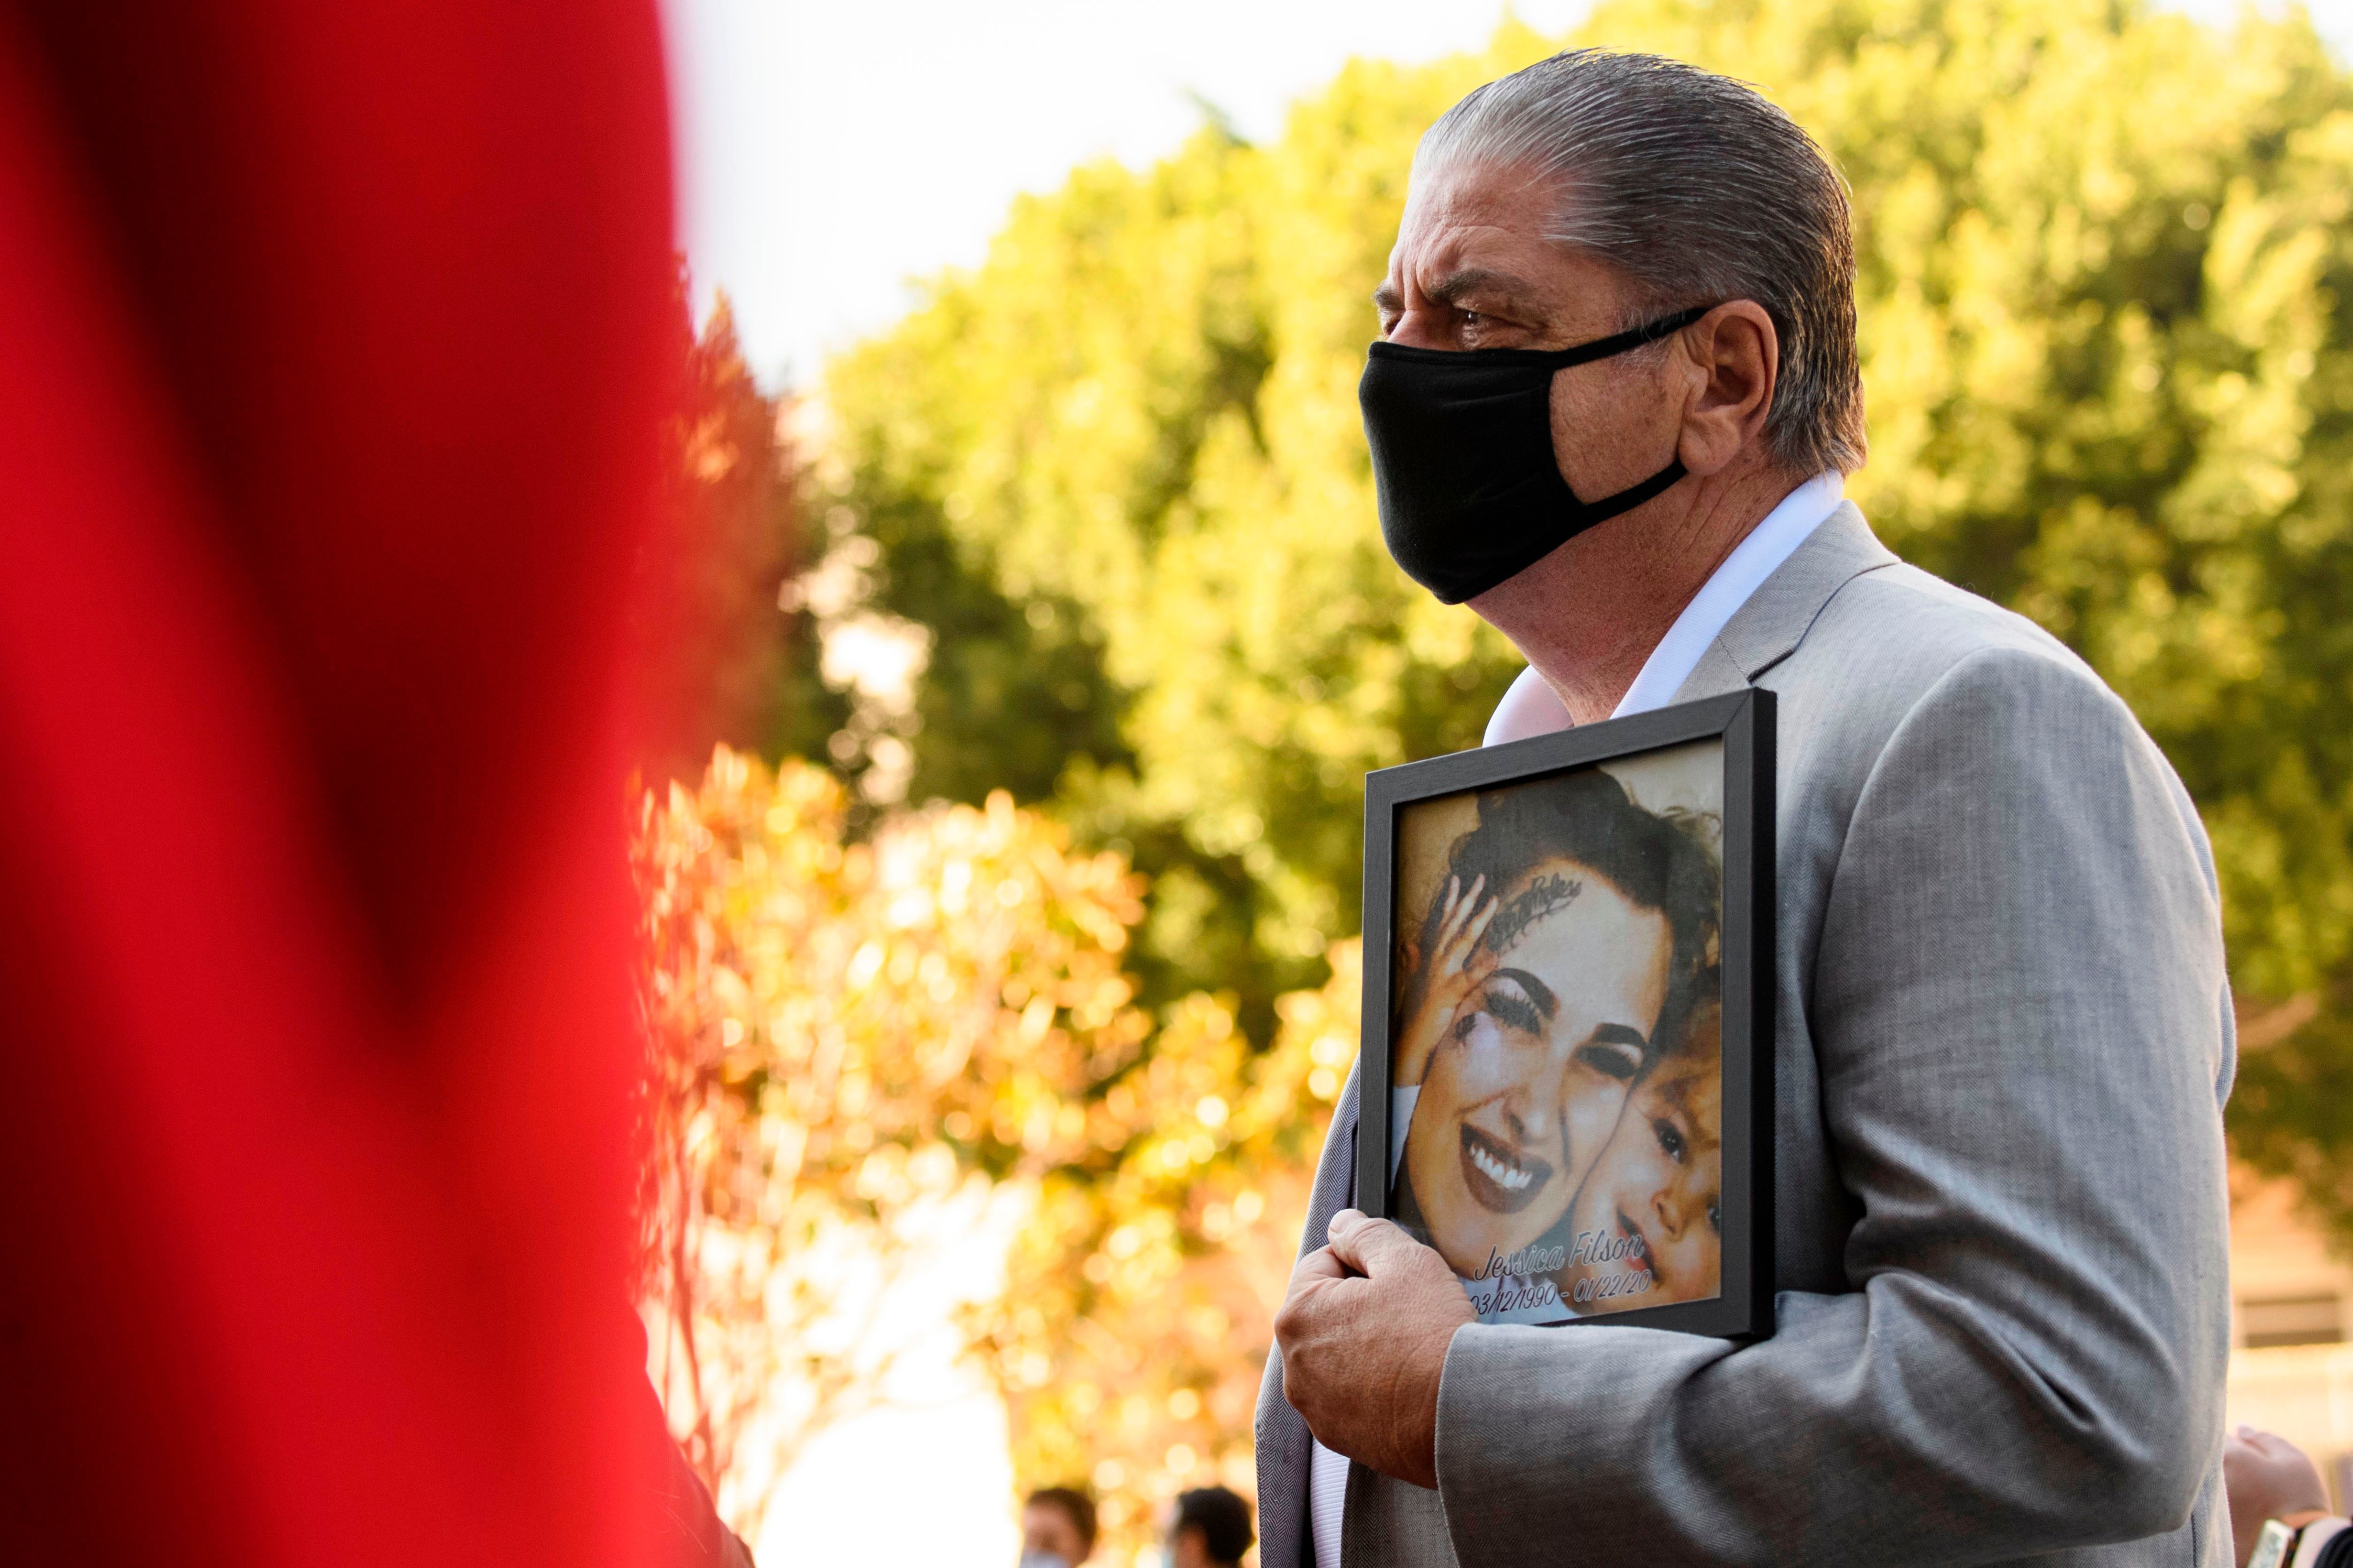 Steve Filson carries a photo of his daughter Jessica Filson, who died in January 2020 of opioids, during a news conference outside the Roybal Federal Building on February 24 in Los Angeles, California. (PATRICK T. FALLON/AFP via Getty Images)